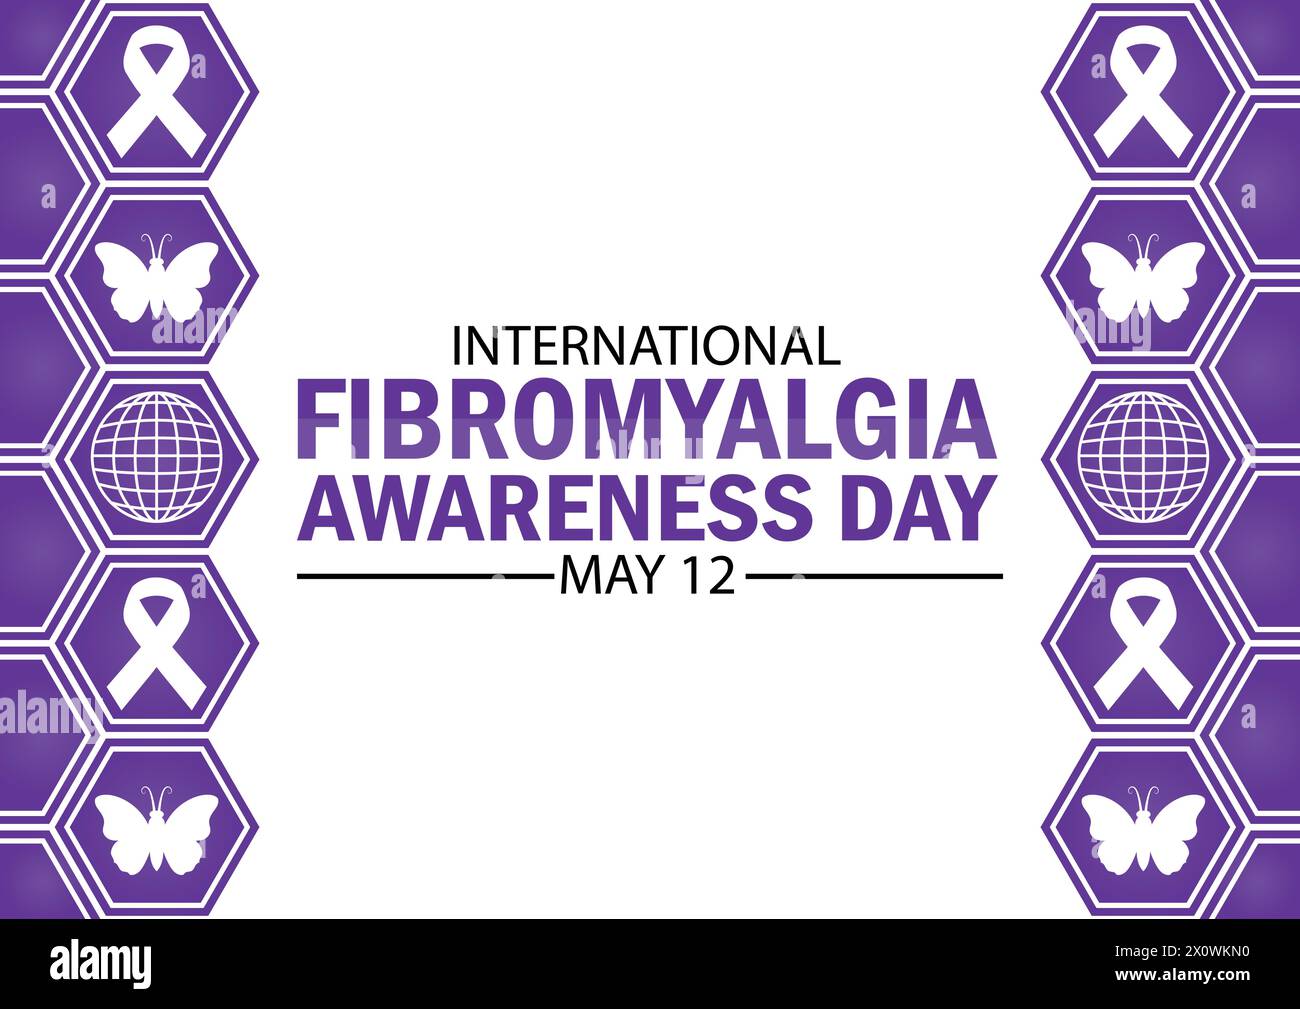 International Fibromyalgia Awareness Day Vector illustration. May 12. Health concept. Template for background, banner, card, poster with text Stock Vector